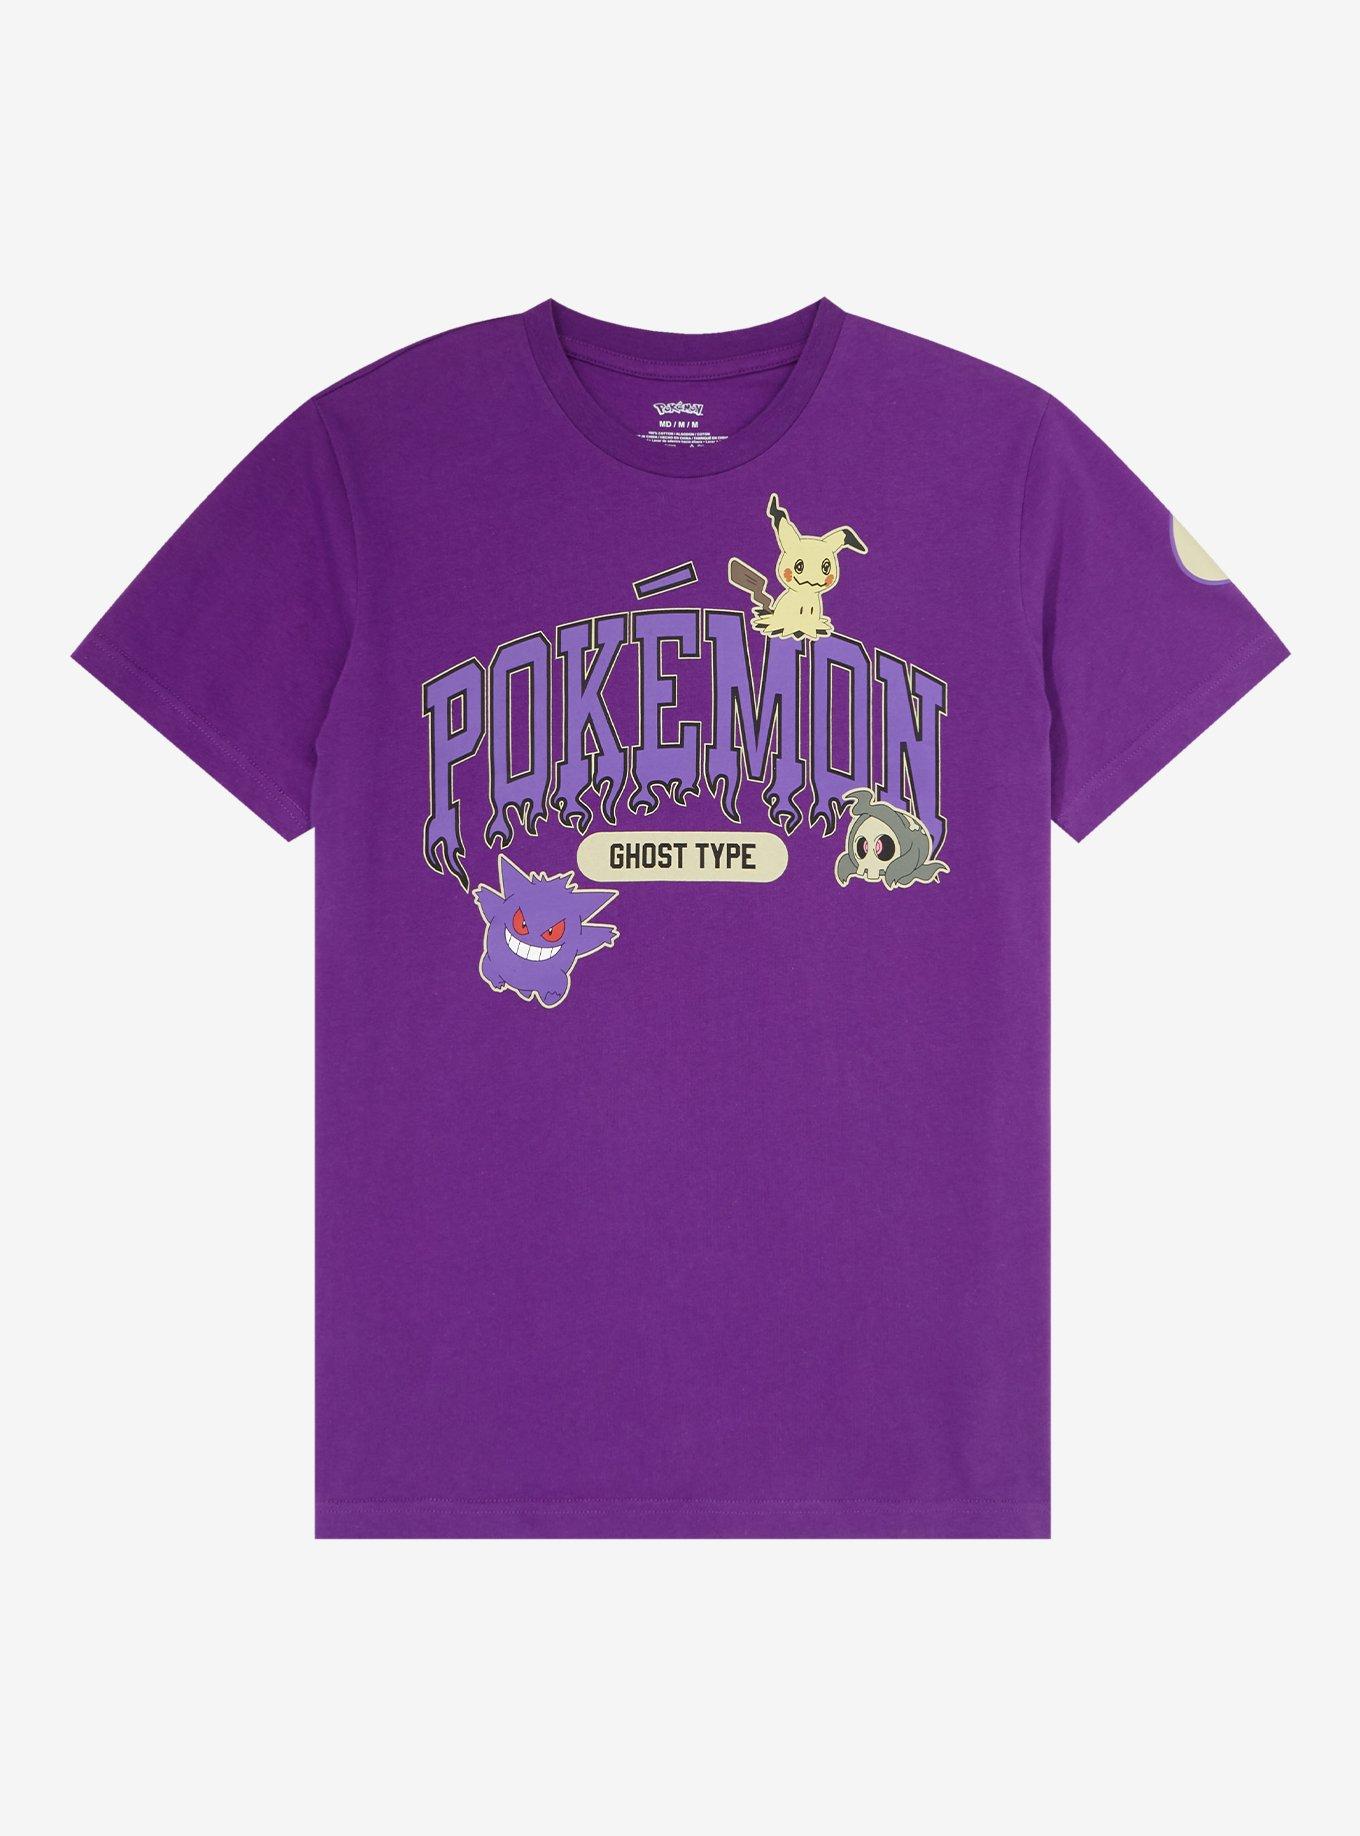 Pokémon Ghost Type T-Shirt - BoxLunch Exclusive | BoxLunch